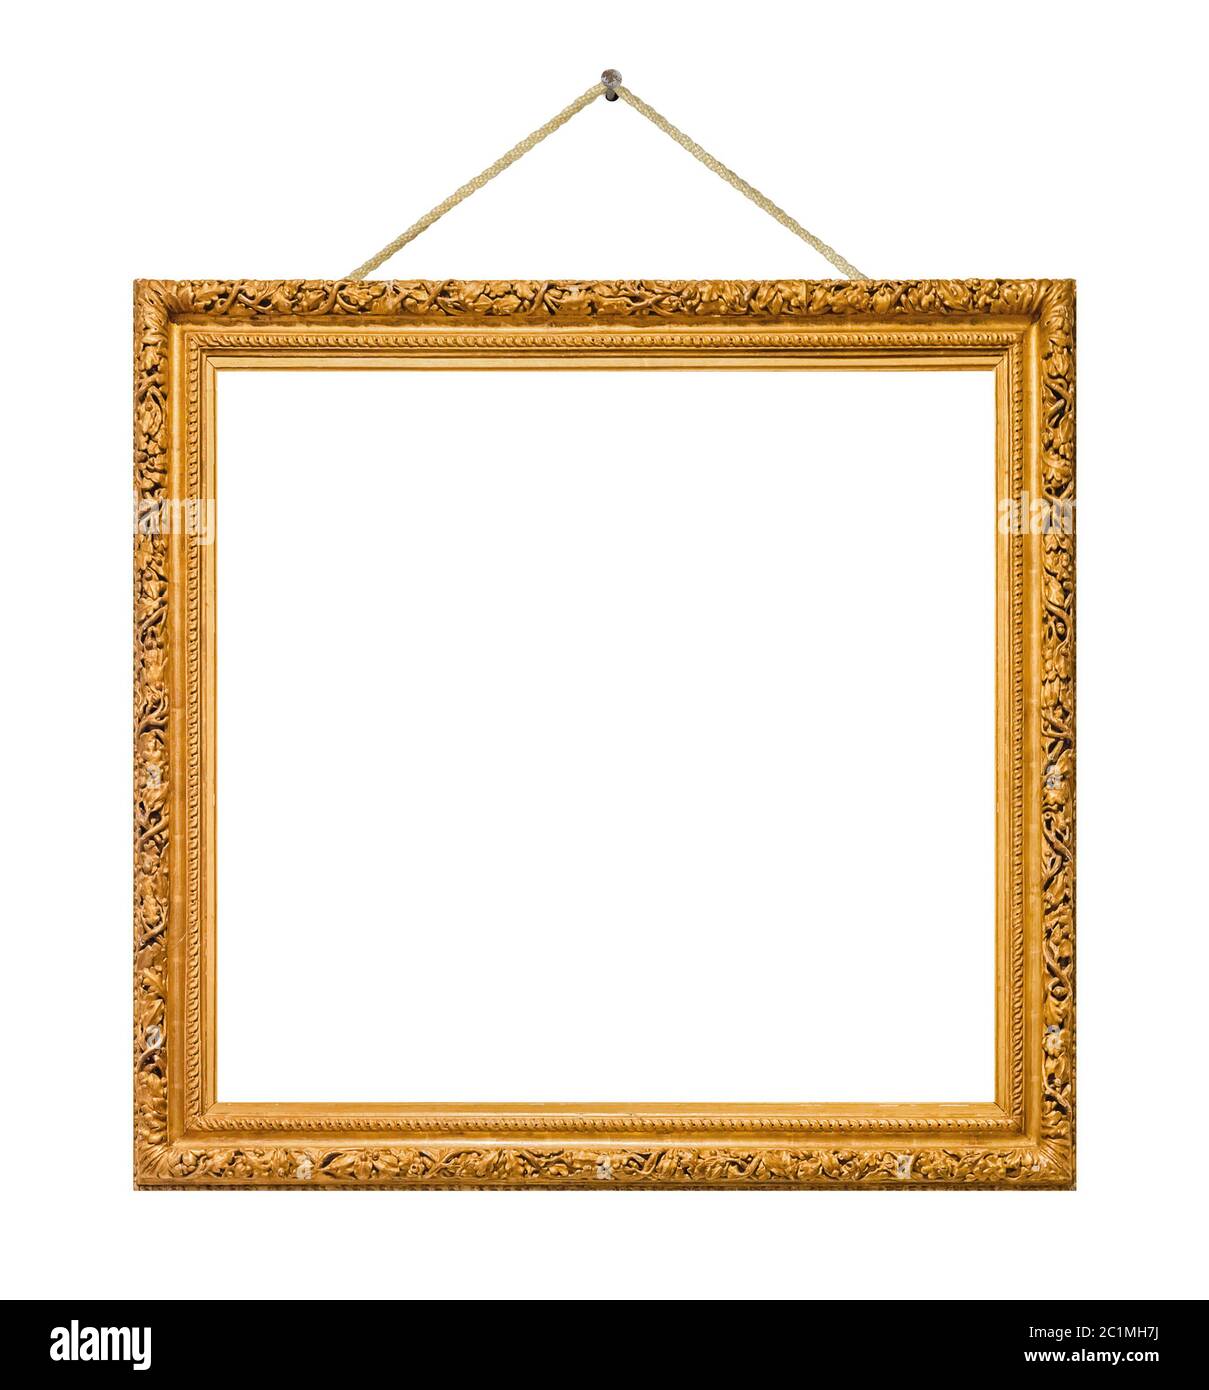 Old wooden picture frame hanging on a rope Stock Photo